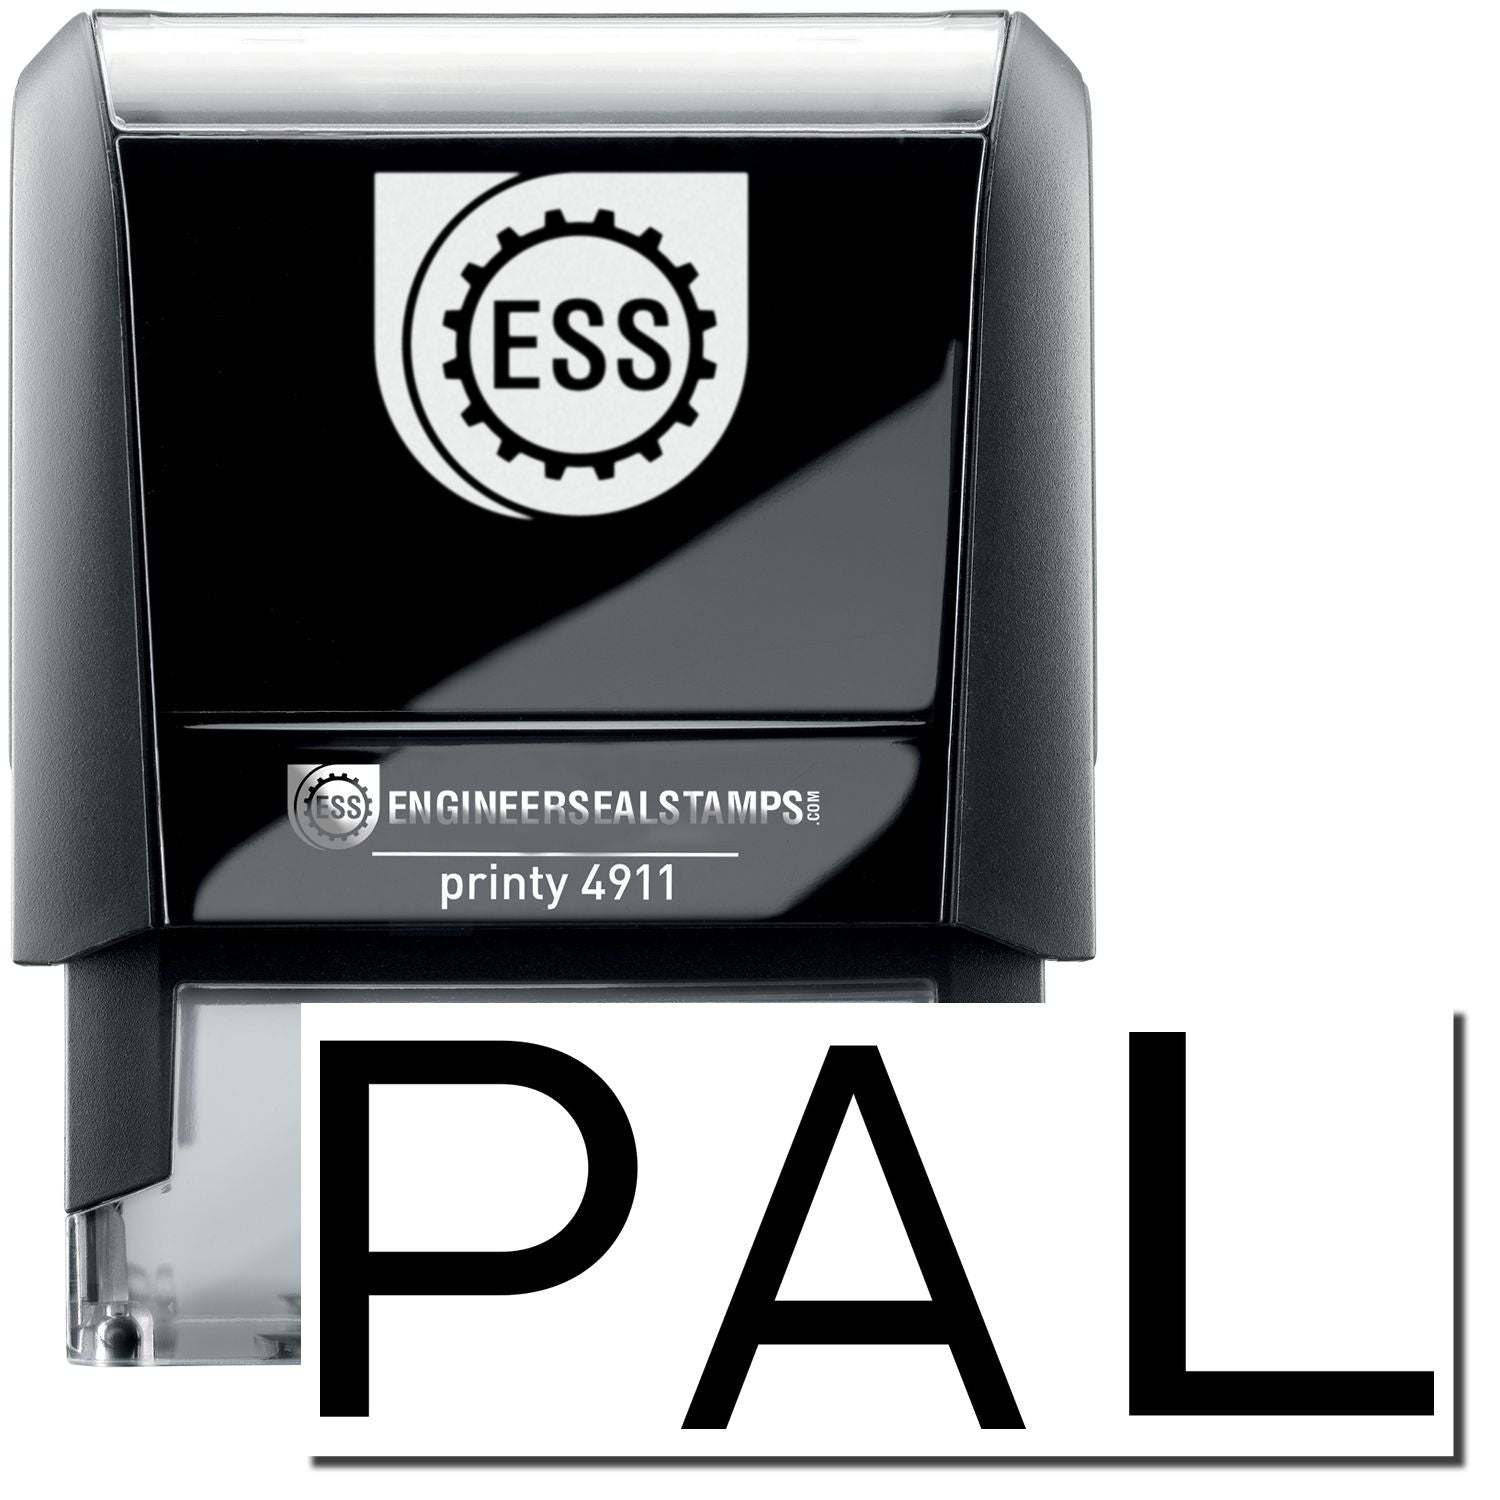 A self-inking stamp with a stamped image showing how the text "PAL" is displayed after stamping.